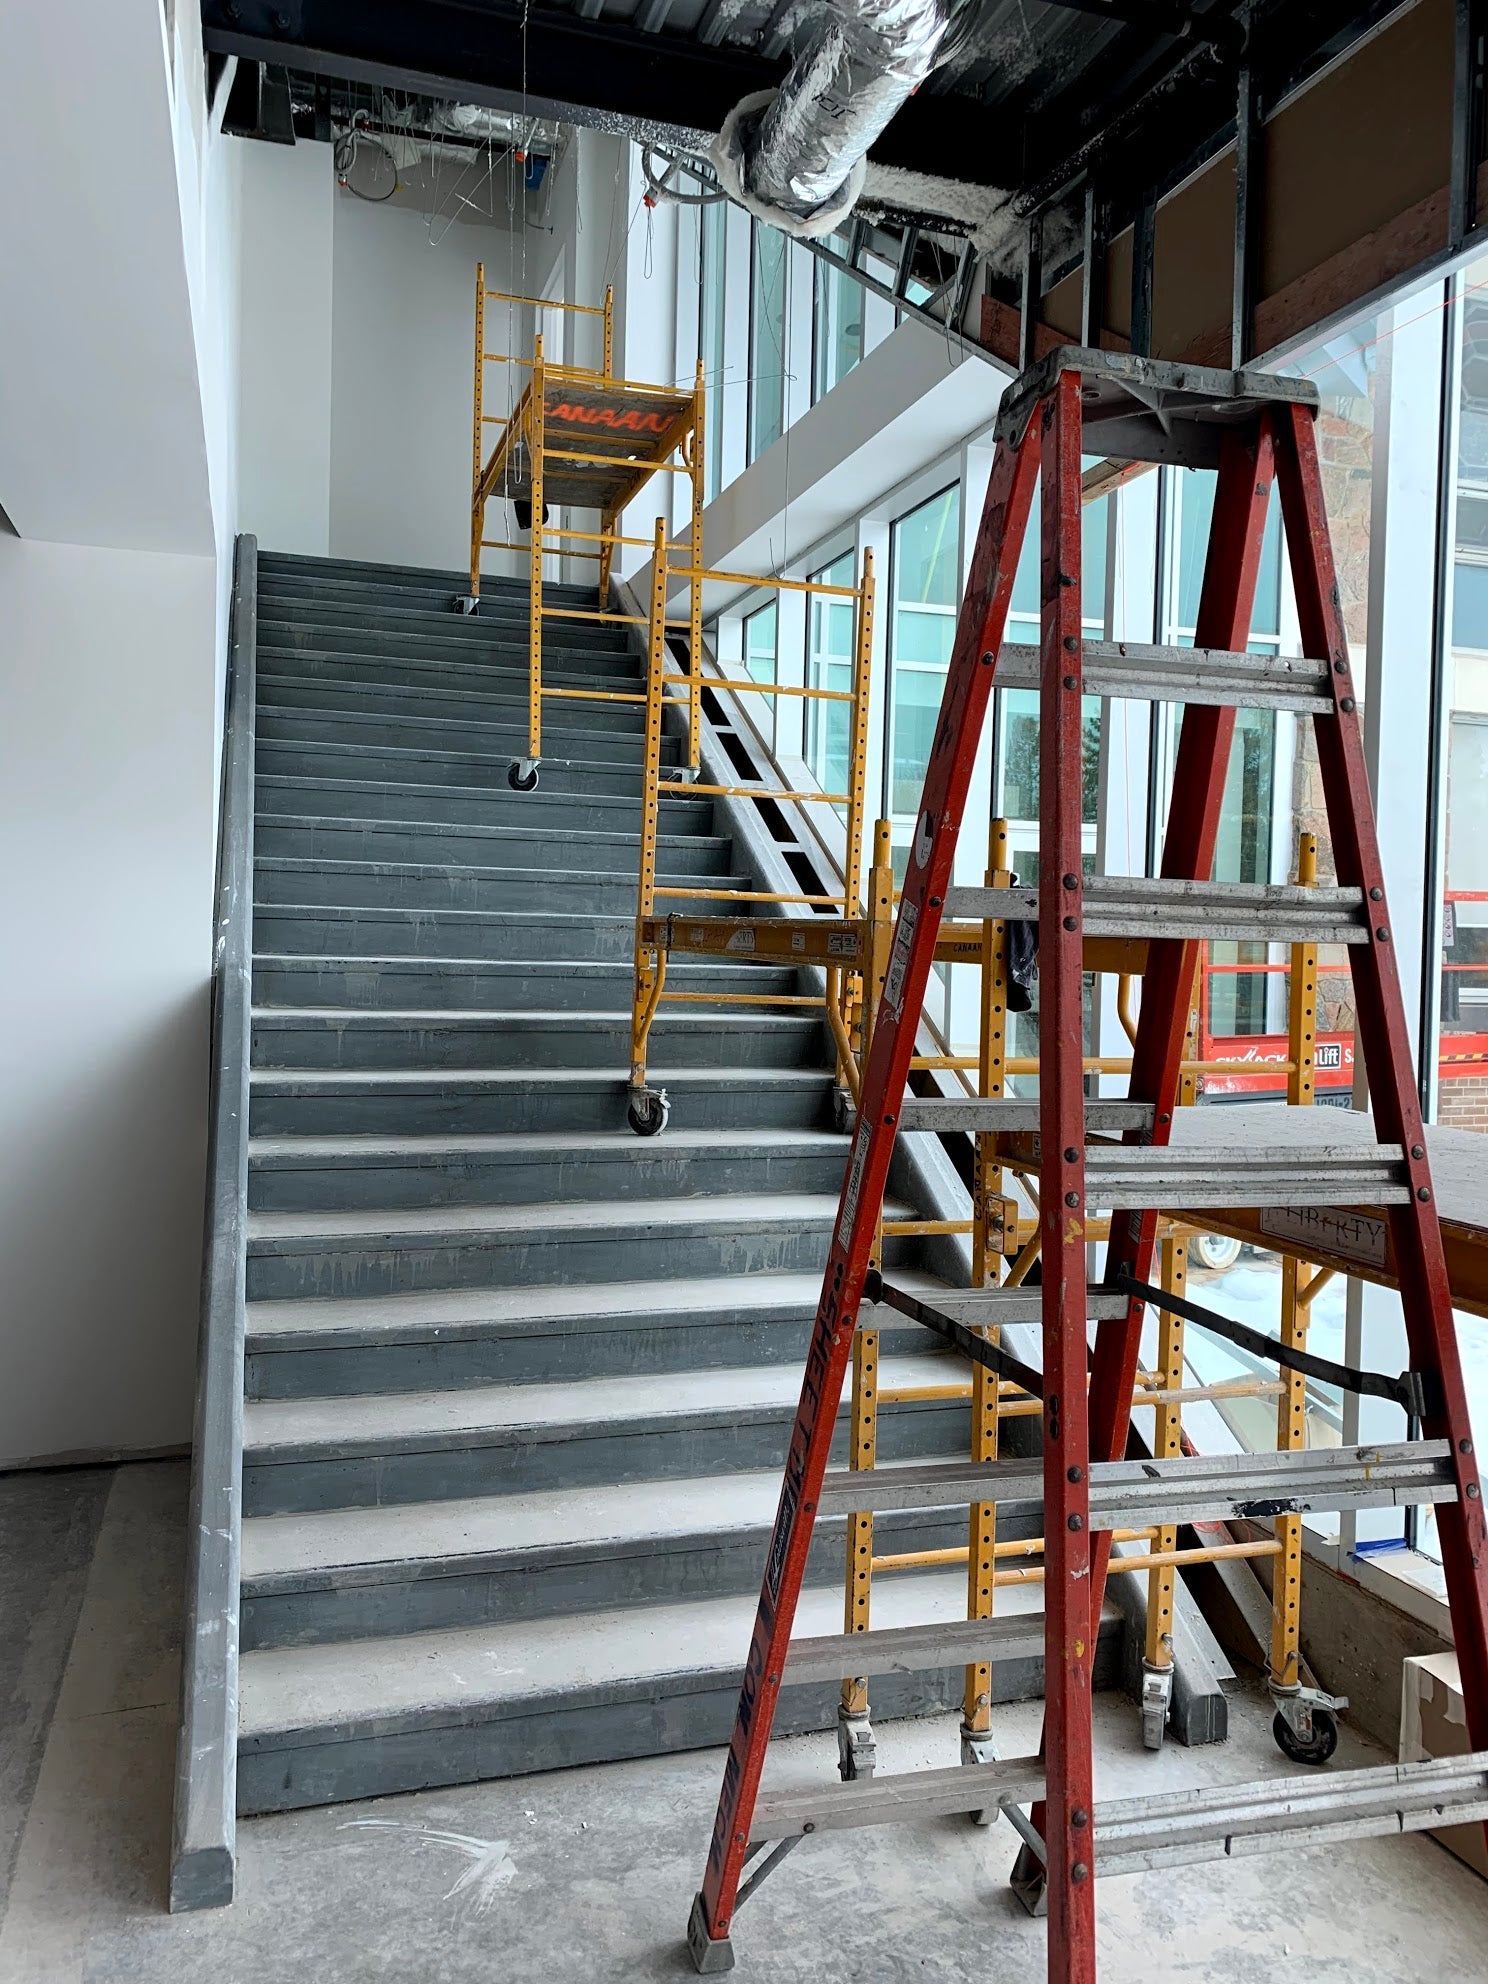 new stairs towards the chapel, with windows and construction ladders